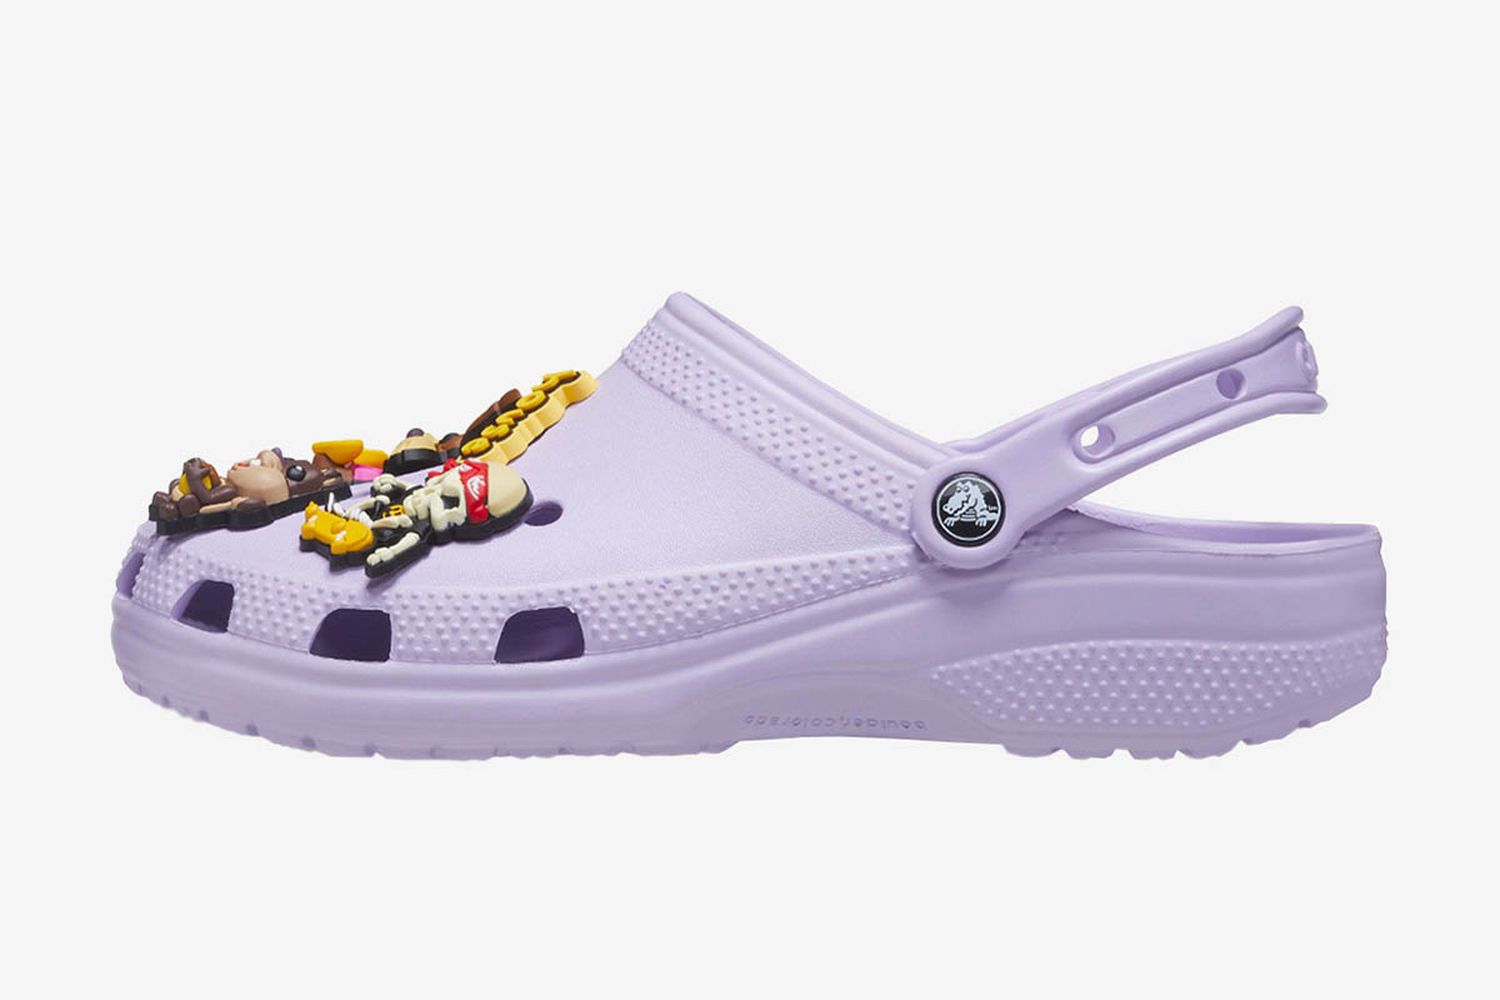 Justin Bieber x Crocs: Where to Buy & Resale Prices